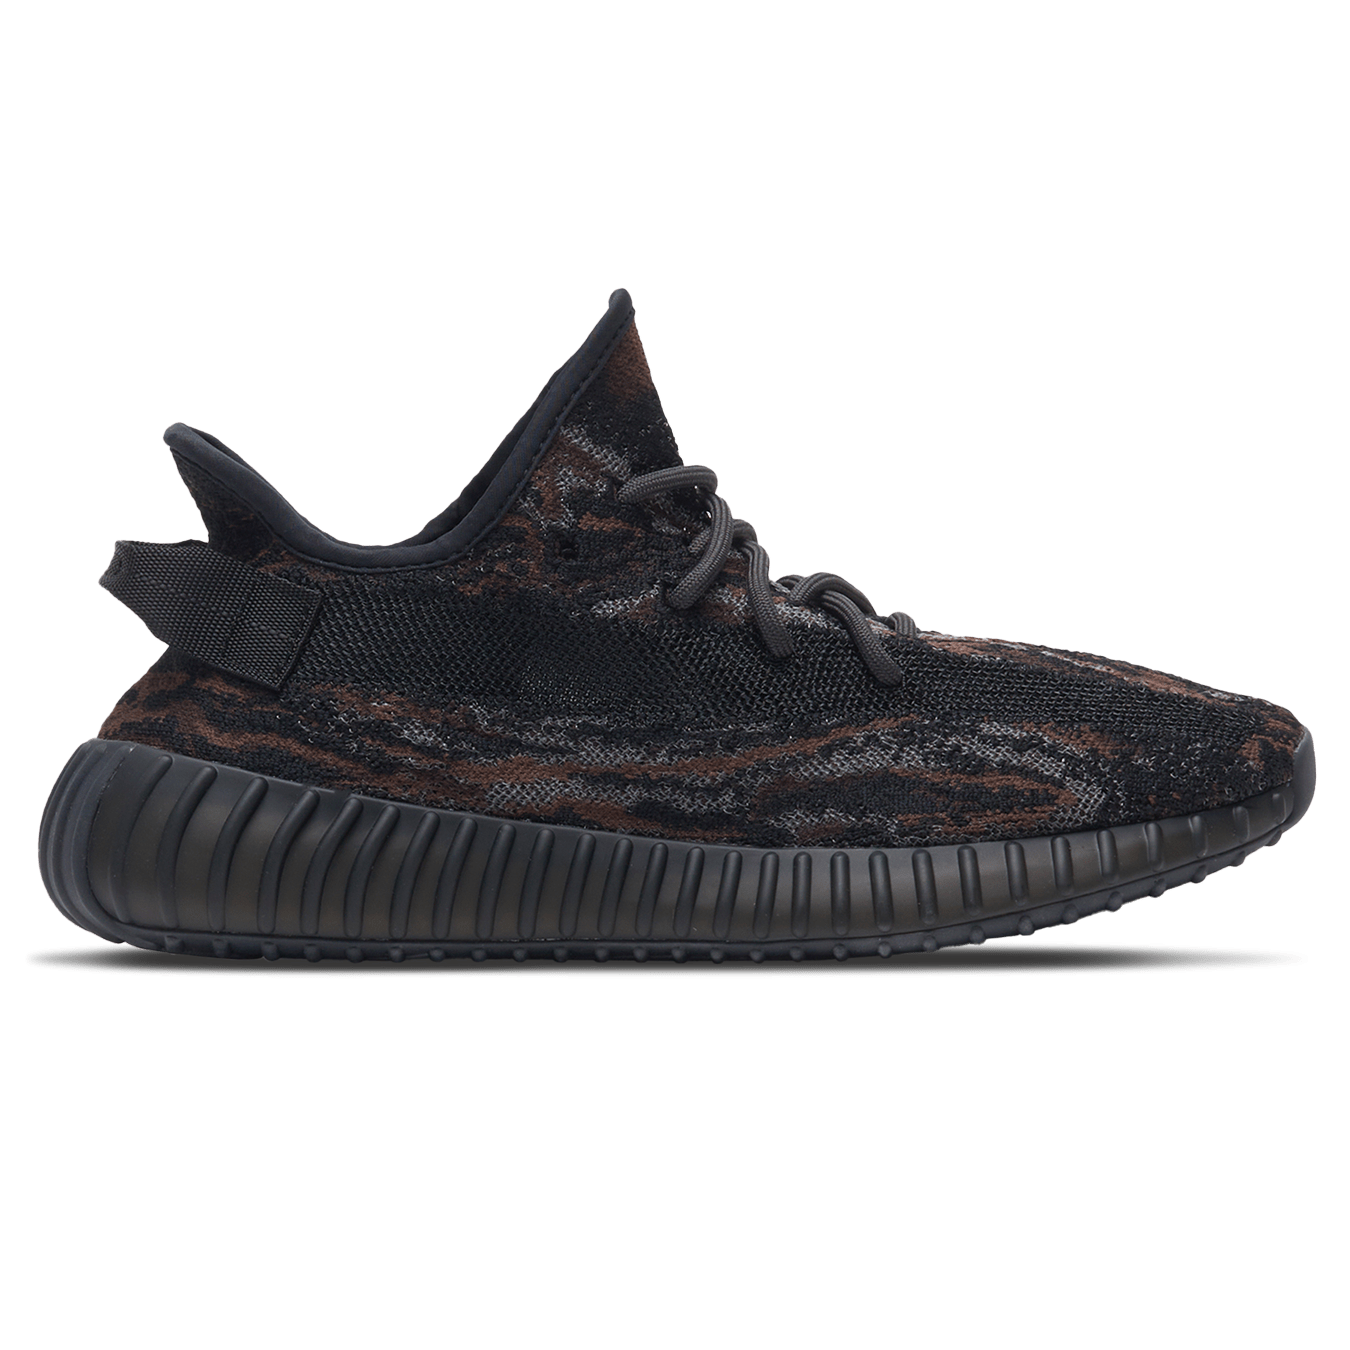 Adidas Yeezy Boost 350 V2 'MX Rock' – What's Your Size UK